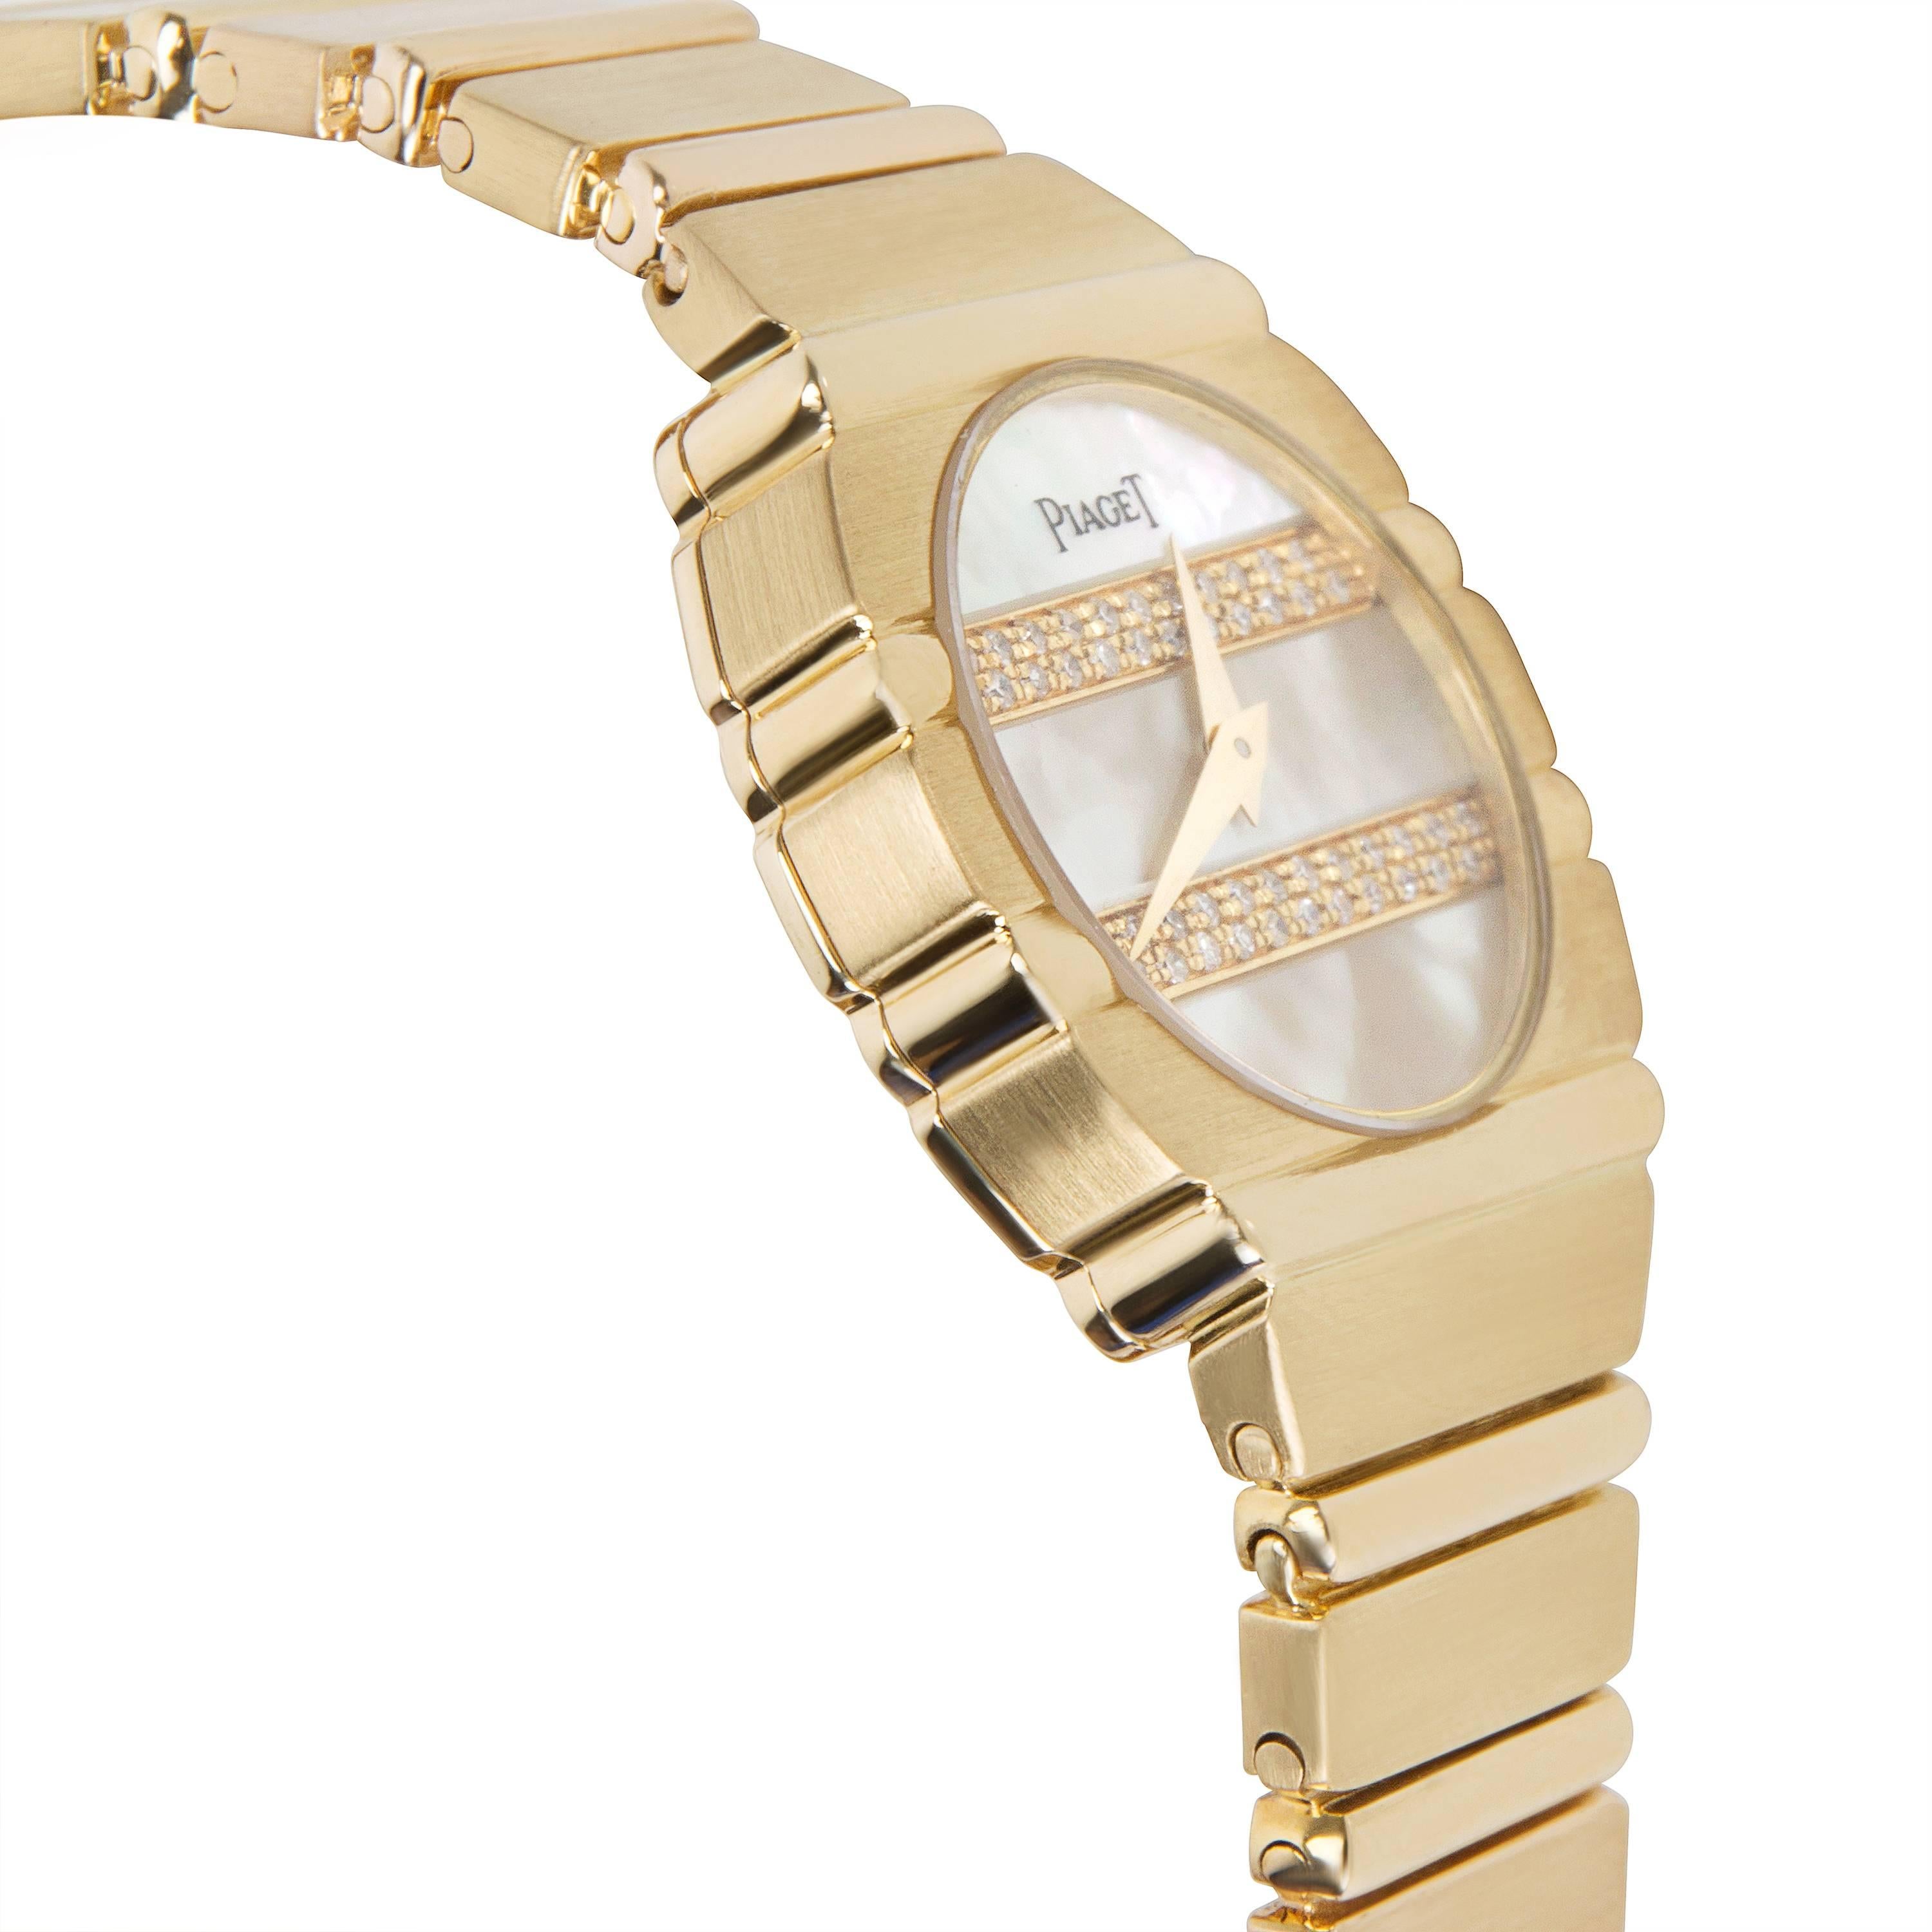 Round Cut Piaget Polo 861 C 701 Women's Watch Mother of Pearl Dial in 18K Yellow Gold